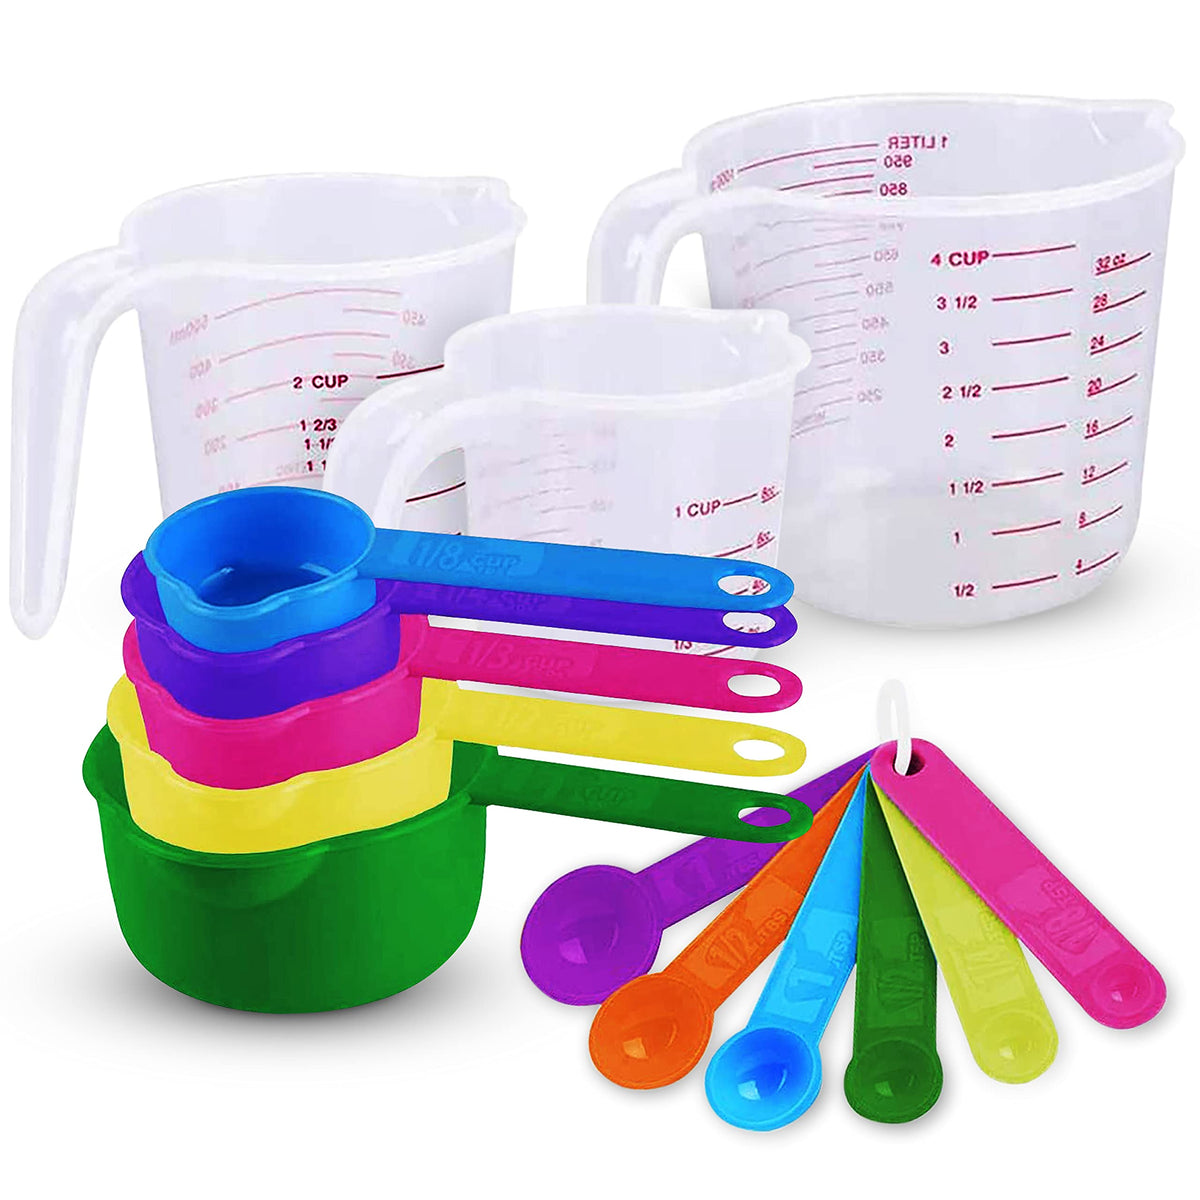 Measuring cups and spoons set of 12, Plastic Colorful Measuring Cups M —  CHIMIYA